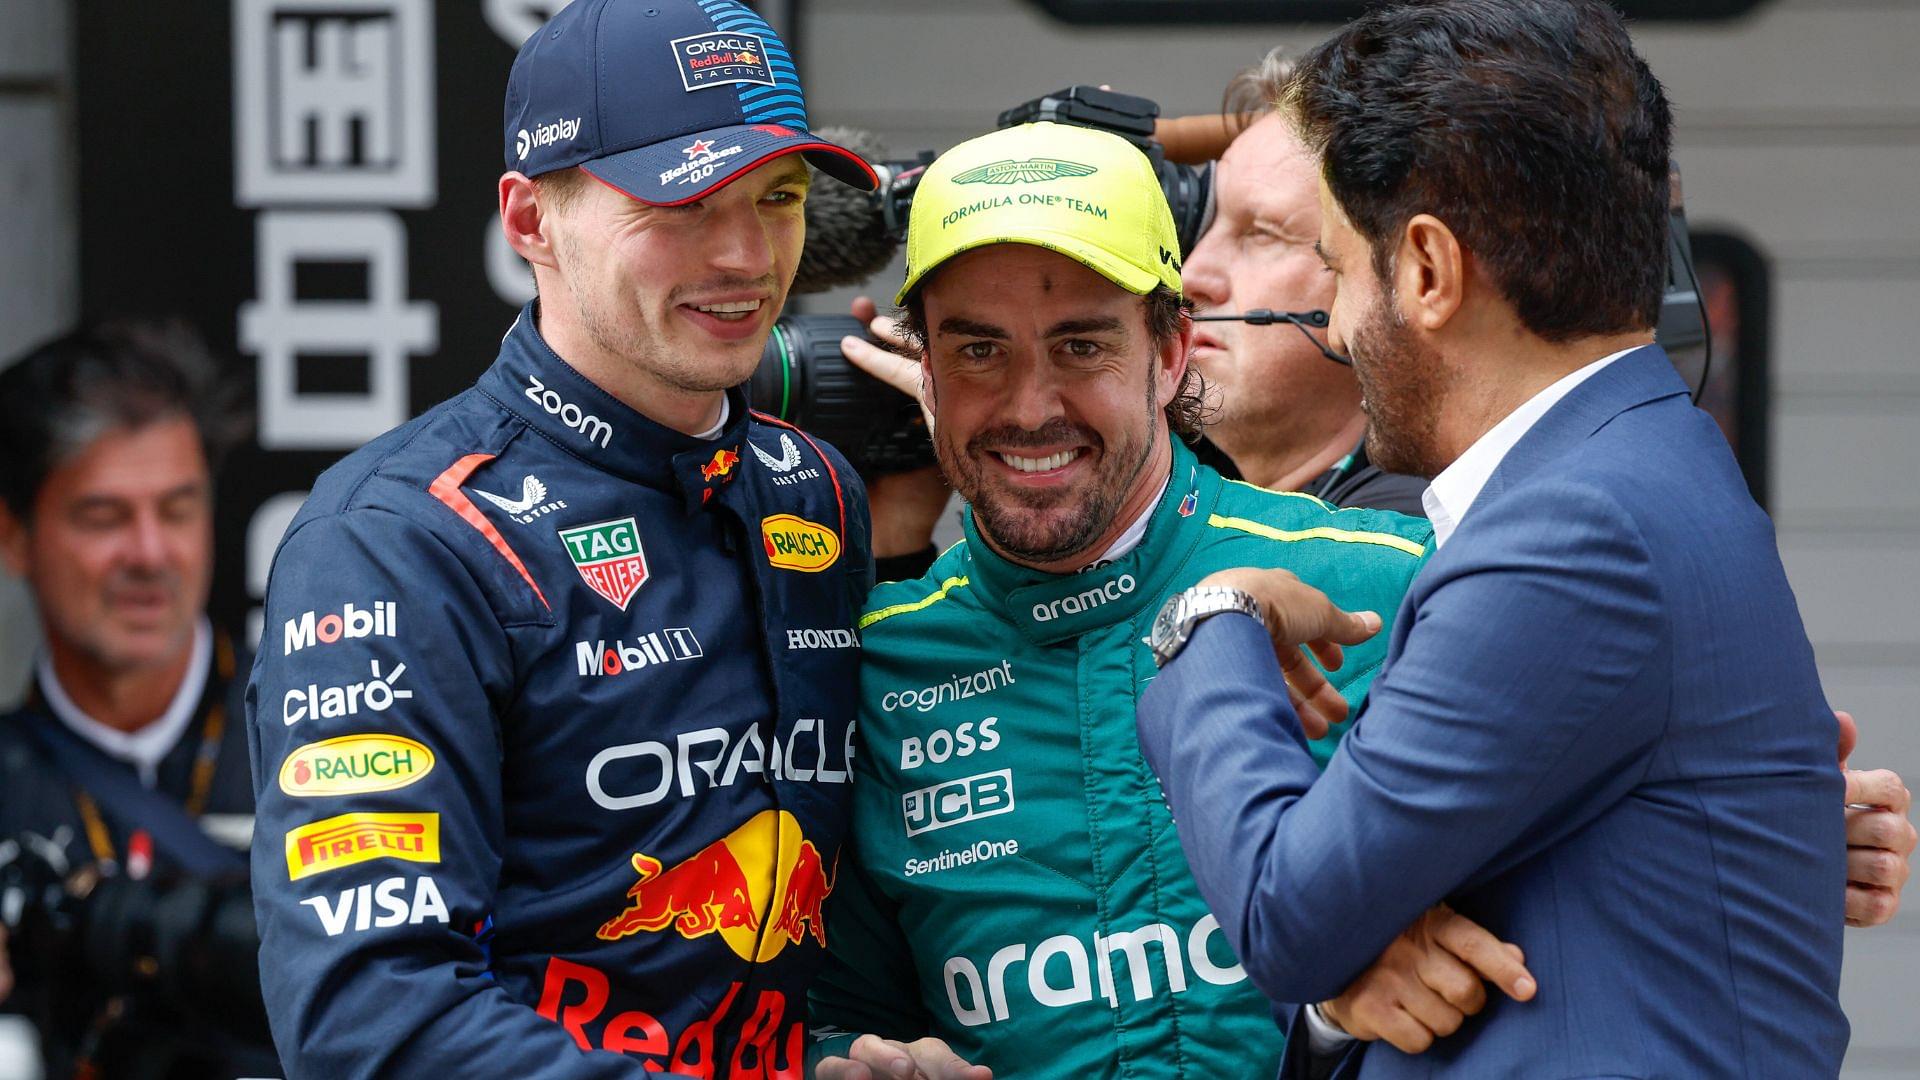 Fernando Alonso Slams Max Verstappen’s Dreams of Retiring From F1 in His 40s - “That’s What I Was Thinking”